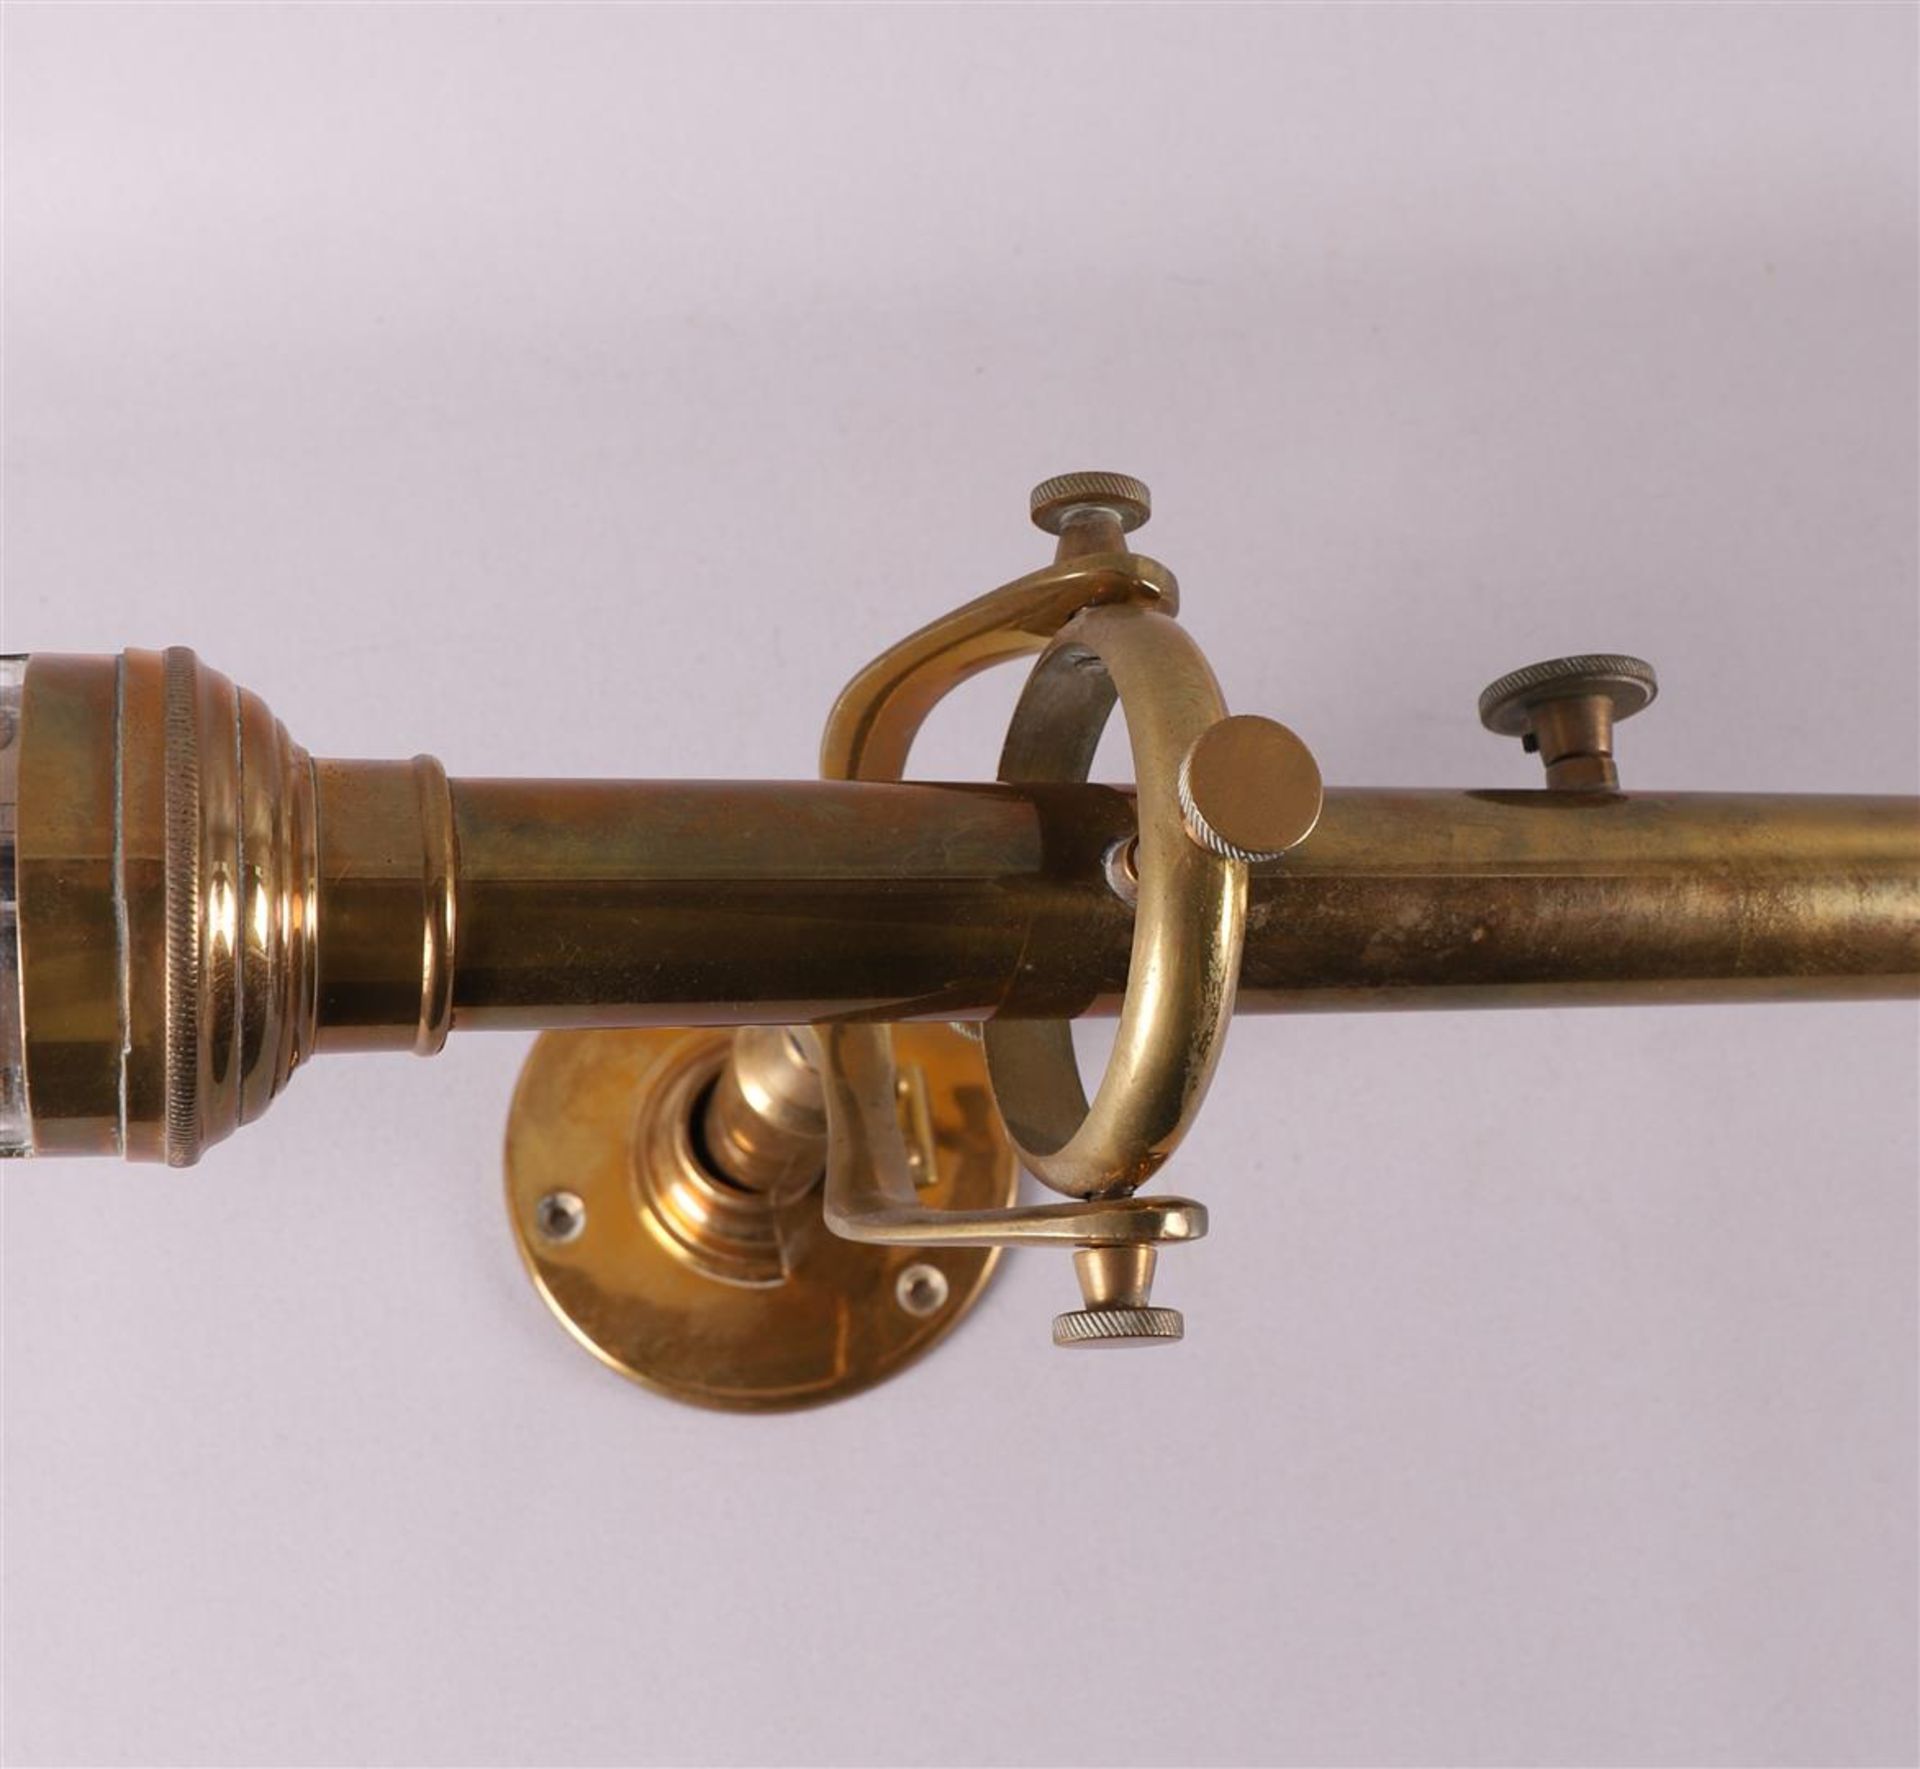 A ship's barometer with gimbal suspension in brass housing, 2nd half of the 20th century. - Image 3 of 3